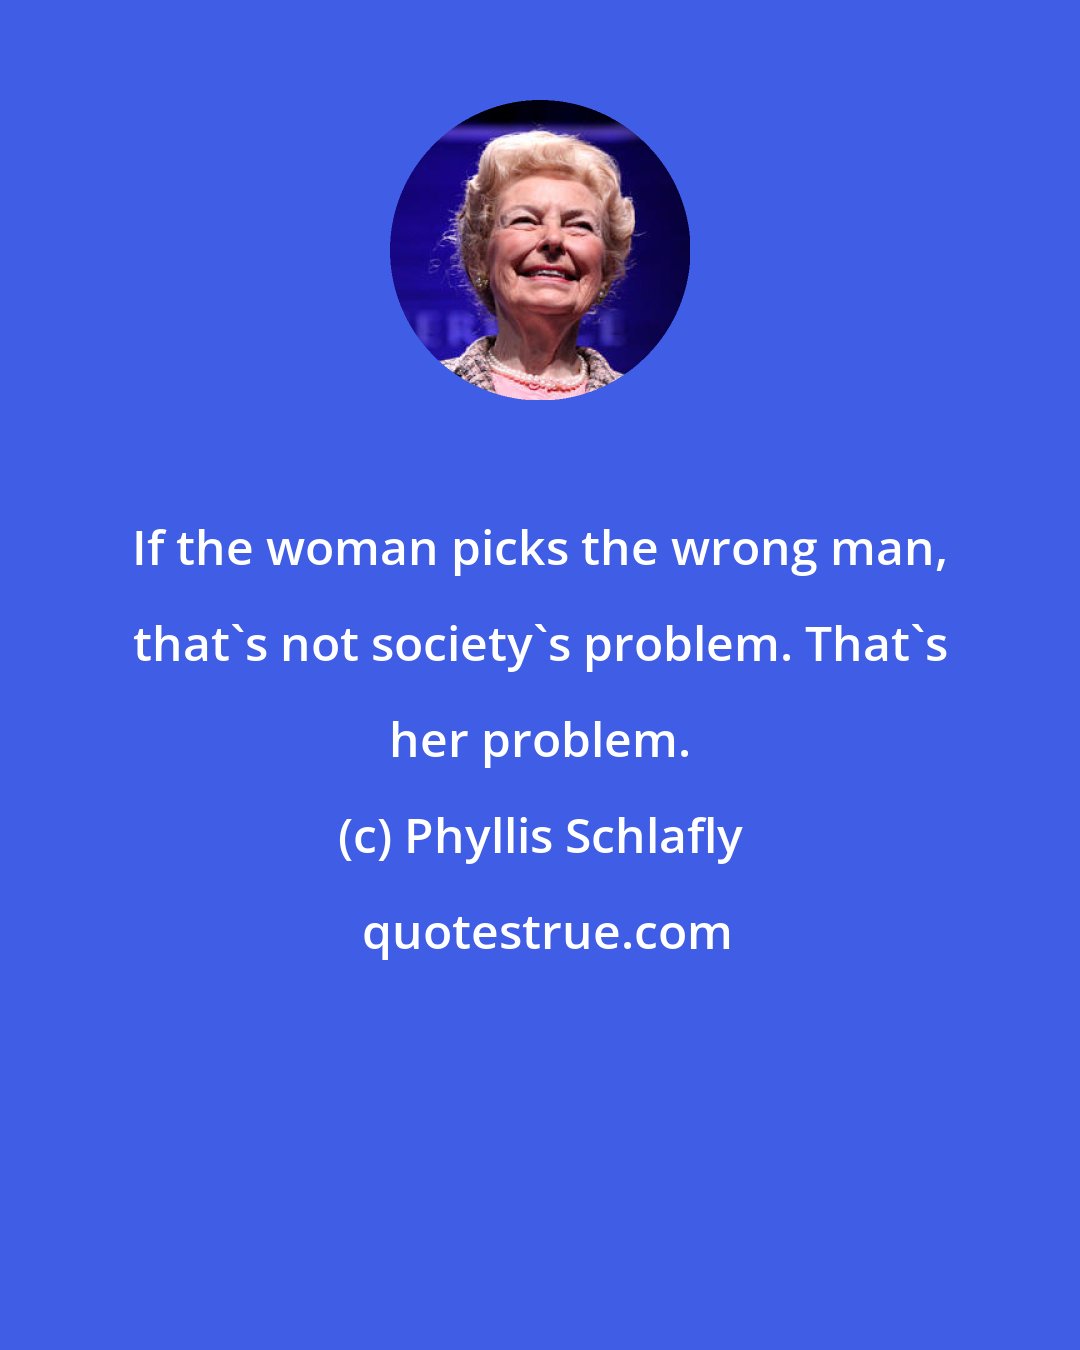 Phyllis Schlafly: If the woman picks the wrong man, that's not society's problem. That's her problem.